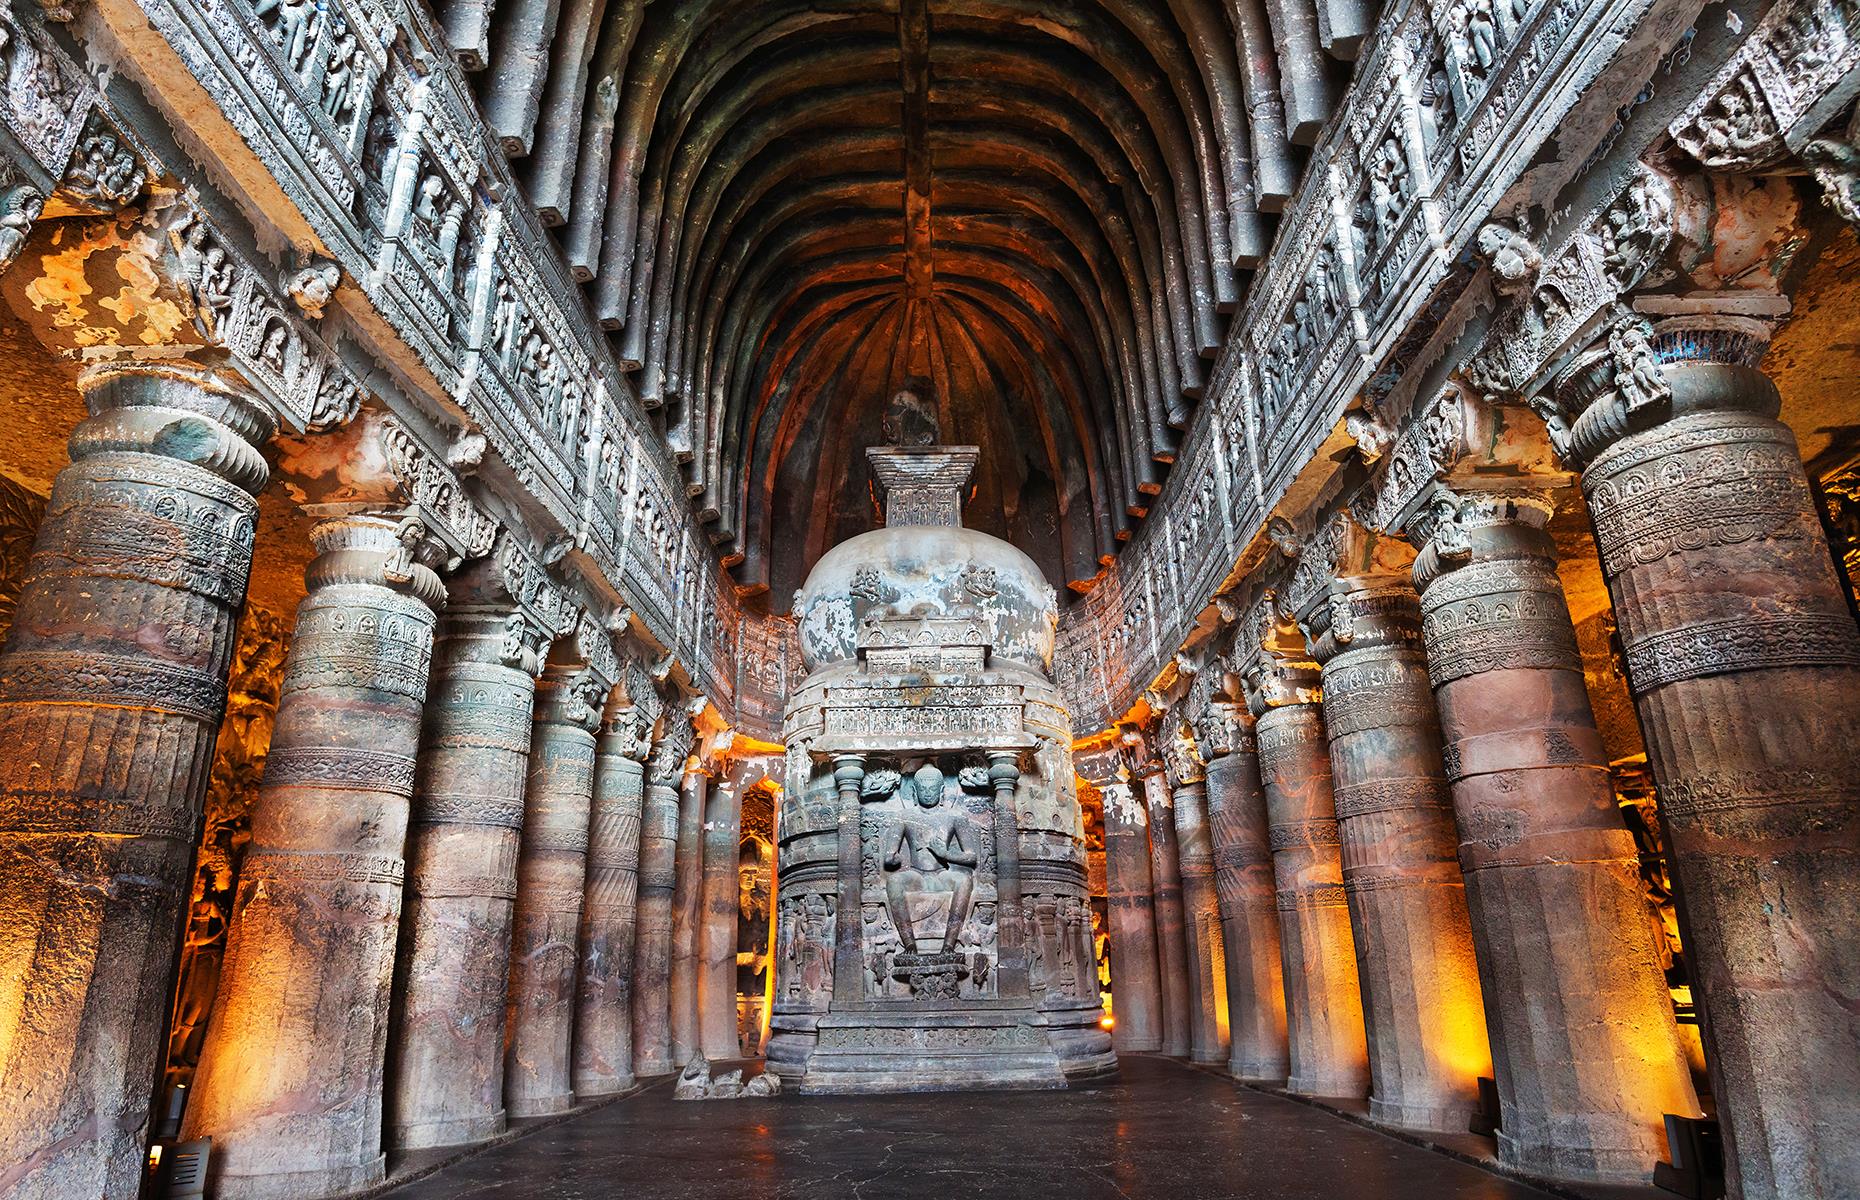 A one-time sanctuary for Buddhist monks, the ancient cave complex of prayer halls and monasteries was concealed by jungle for centuries until a young British cavalry officer spotted the entrance to one of them while on a tiger hunt in 1819. He unearthed an extraordinary place – rock-cut caves with enormous stone figures and splendid intricate murals showing scenes from Buddha’s life.